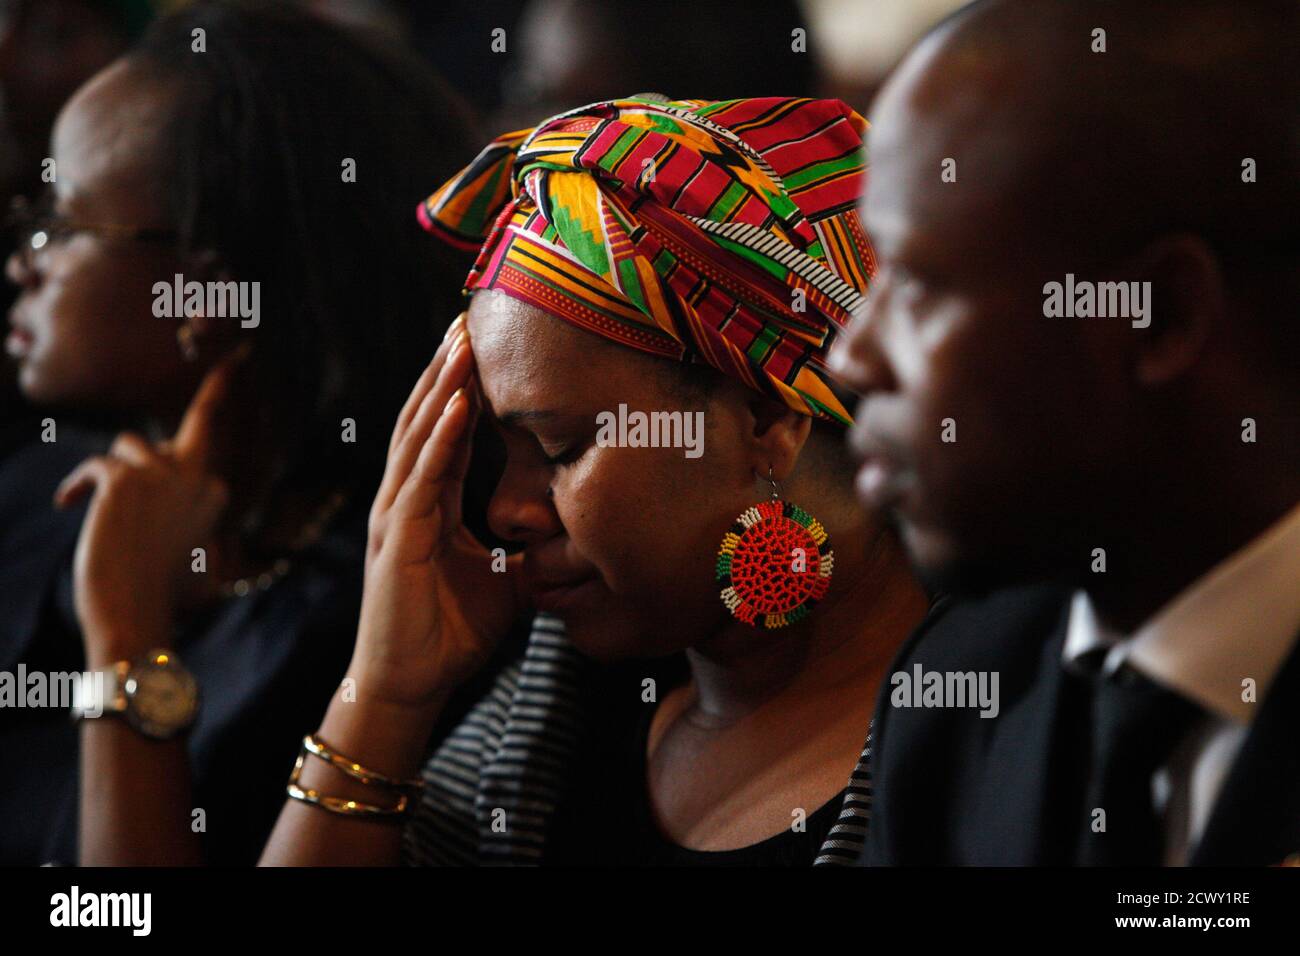 South African expatriates listen to a eulogy during a memorial service for former South African President Nelson Mandela at St George Church in Singapore December 12, 2013. The anti-apartheid hero's death on December 5 at the age of 95 has brought an outpouring of grief and mourning, as well as celebration and thanksgiving for his life and achievements. REUTERS/Edgar Su (SINGAPORE - Tags: POLITICS OBITUARY) Stock Photo